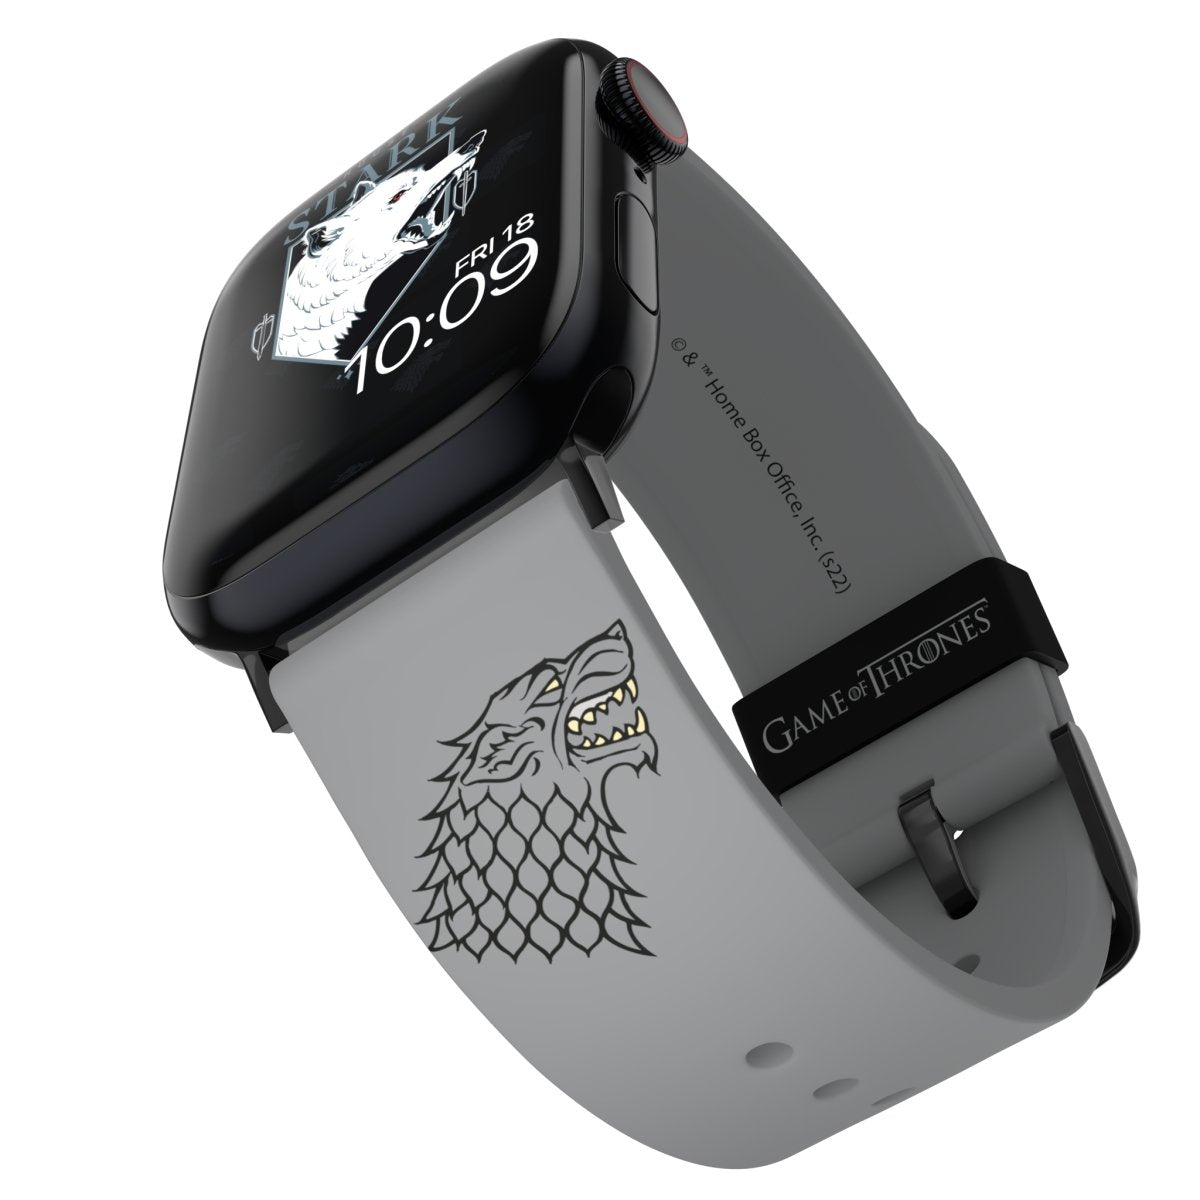 Game of Thrones - House Stark Smartwatch Band